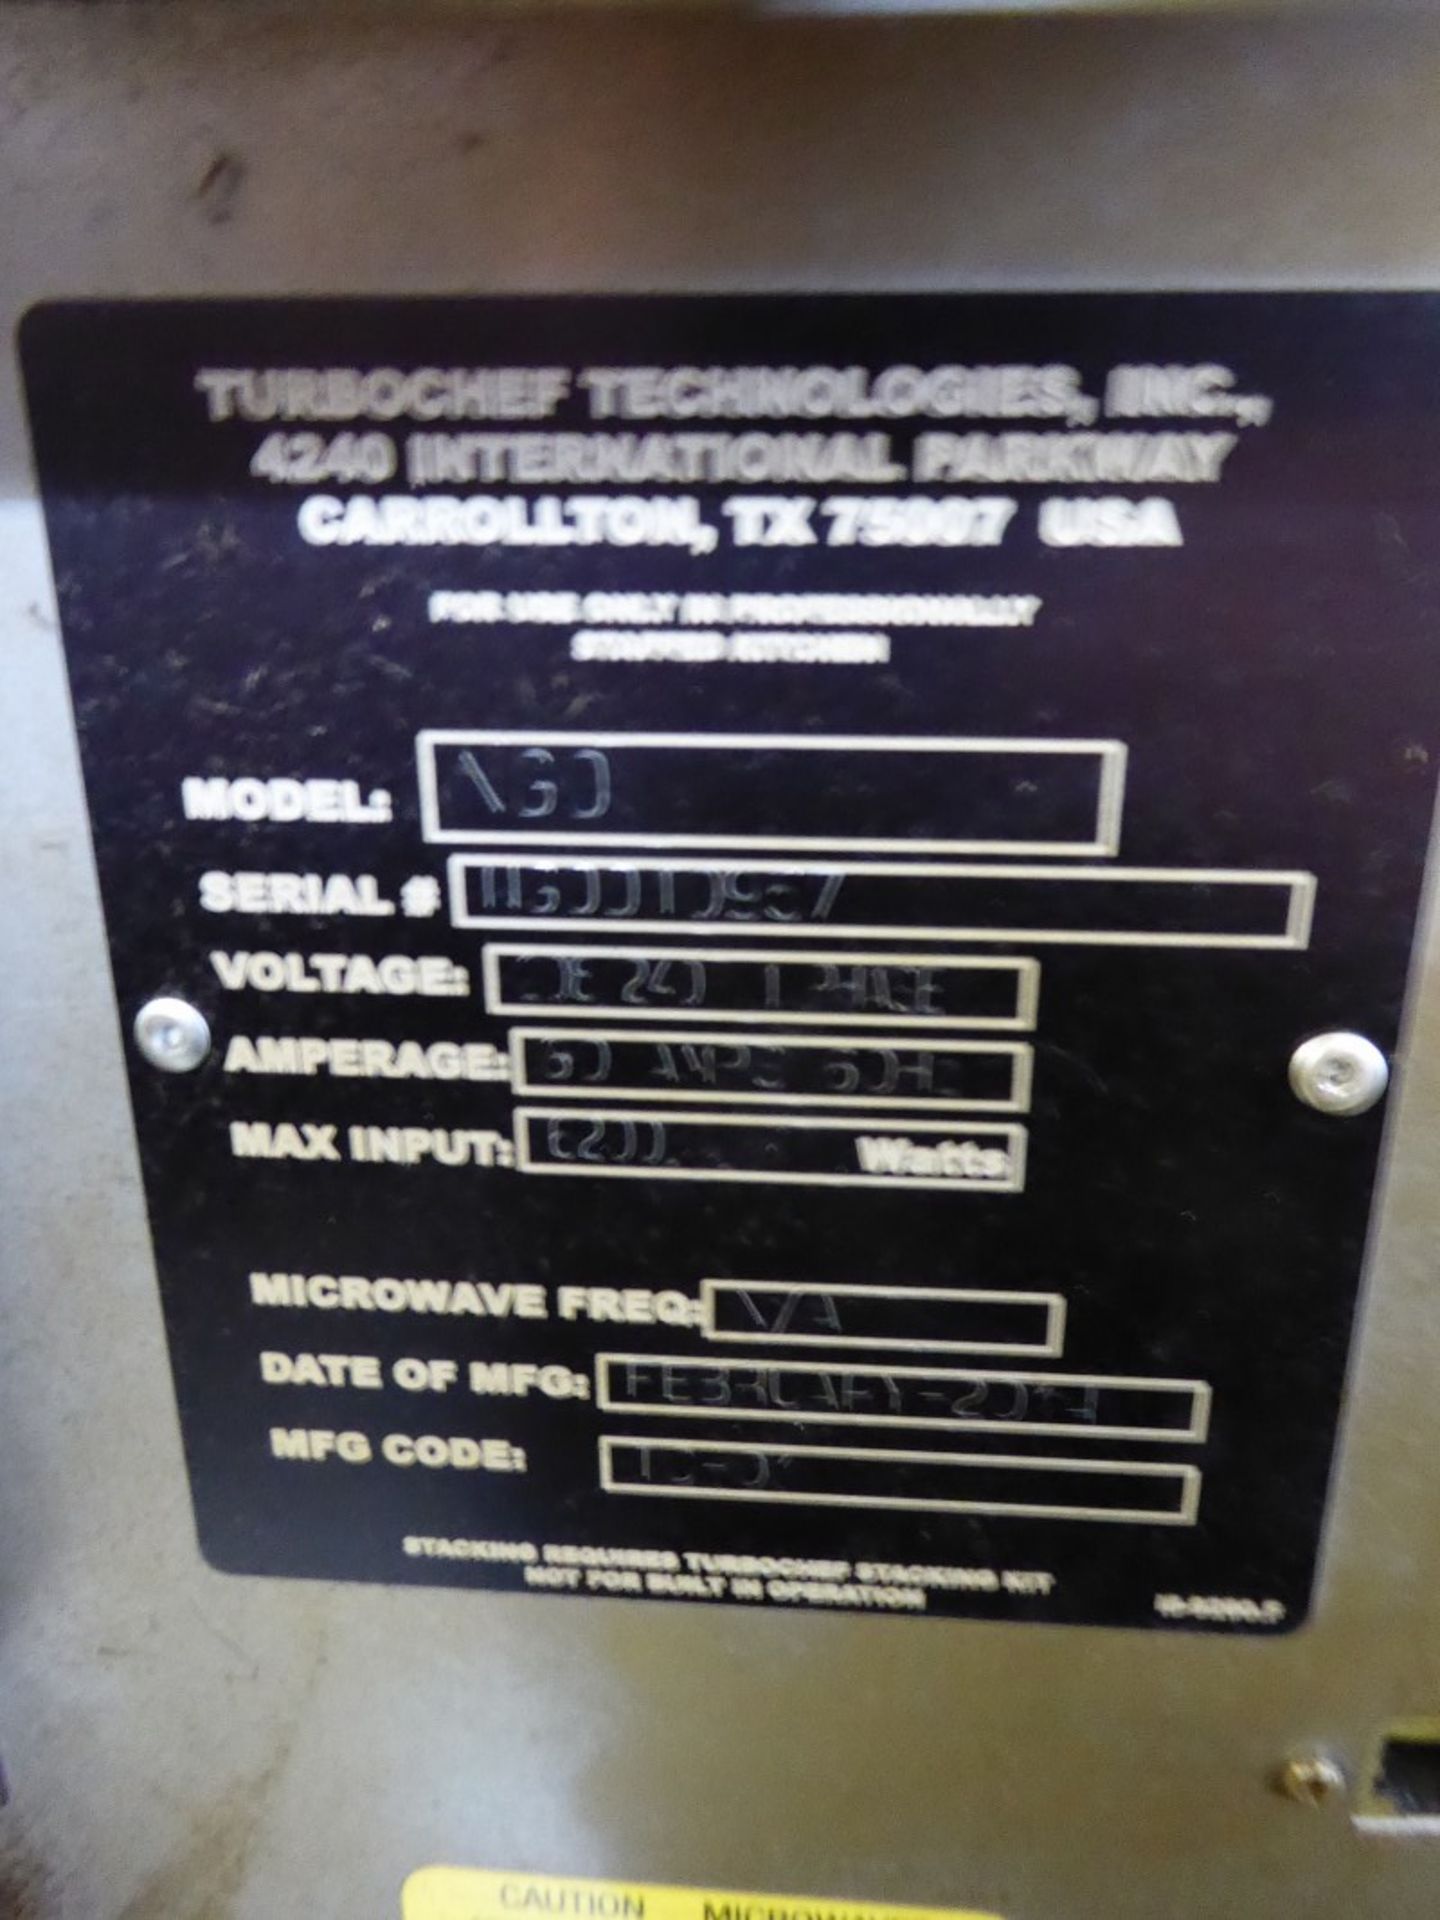 TURBOCHEF - SOTA - VENTLESS RAPID COOK OVEN - MODEL # NG0D - Image 3 of 3